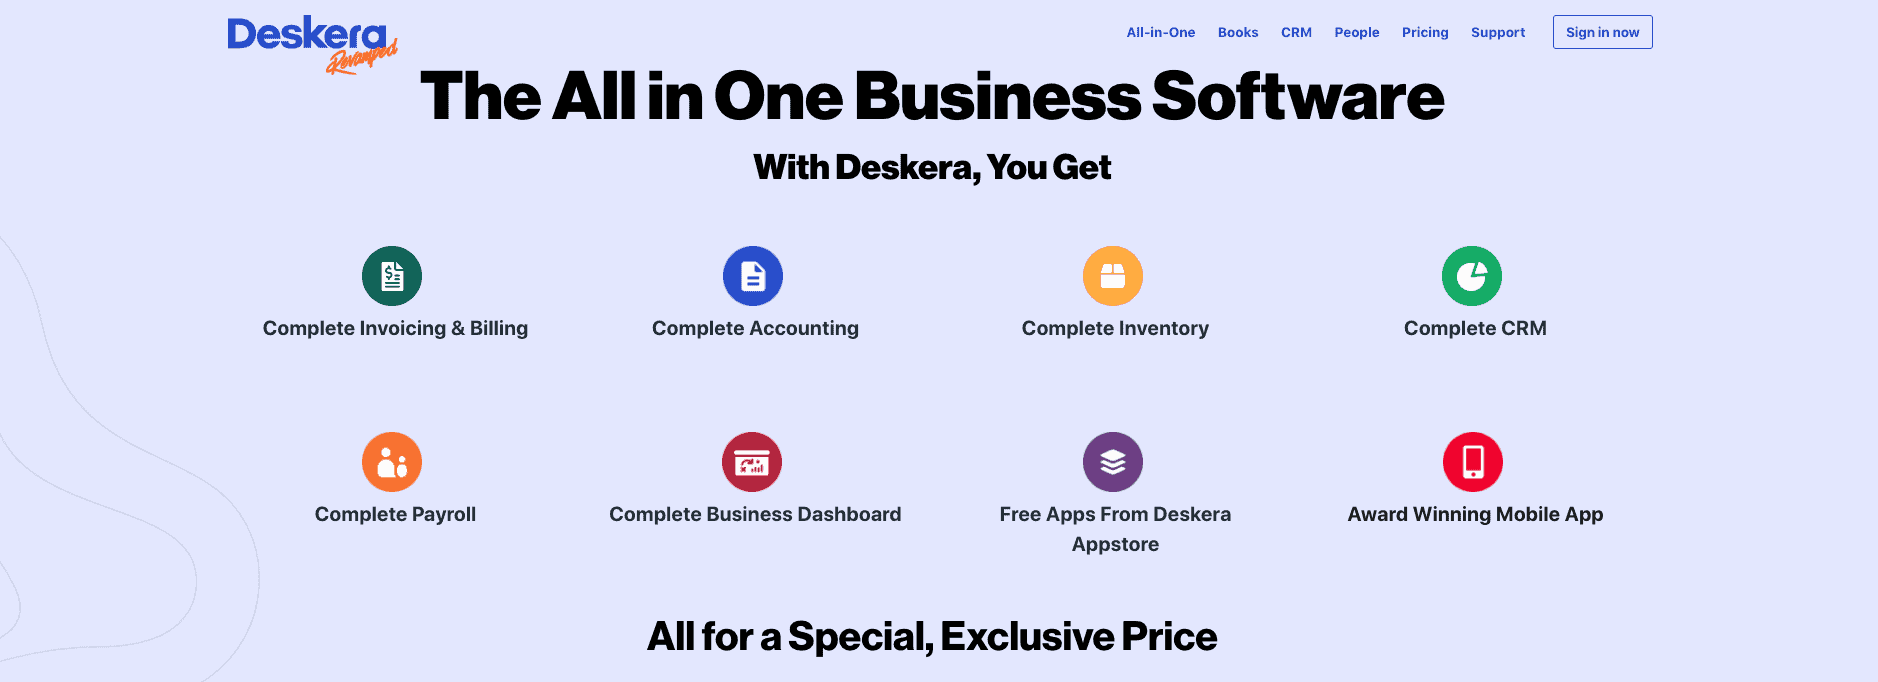 Small business all in one management software Deskera